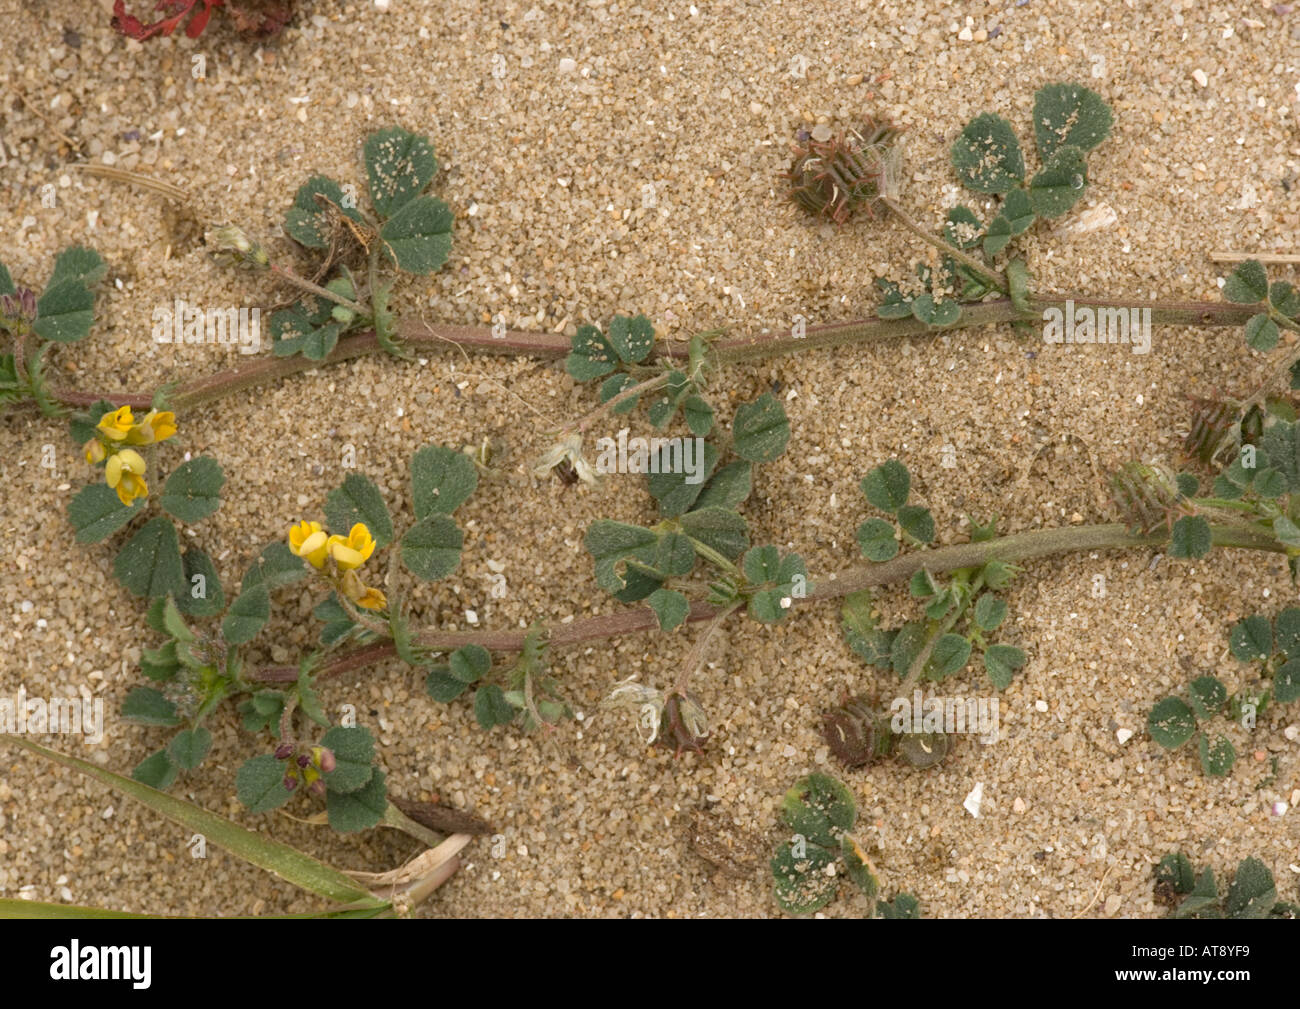 Toothed medick with flowers and fruit Burs On sand Rare in UK. Medicago polymorpha Stock Photo